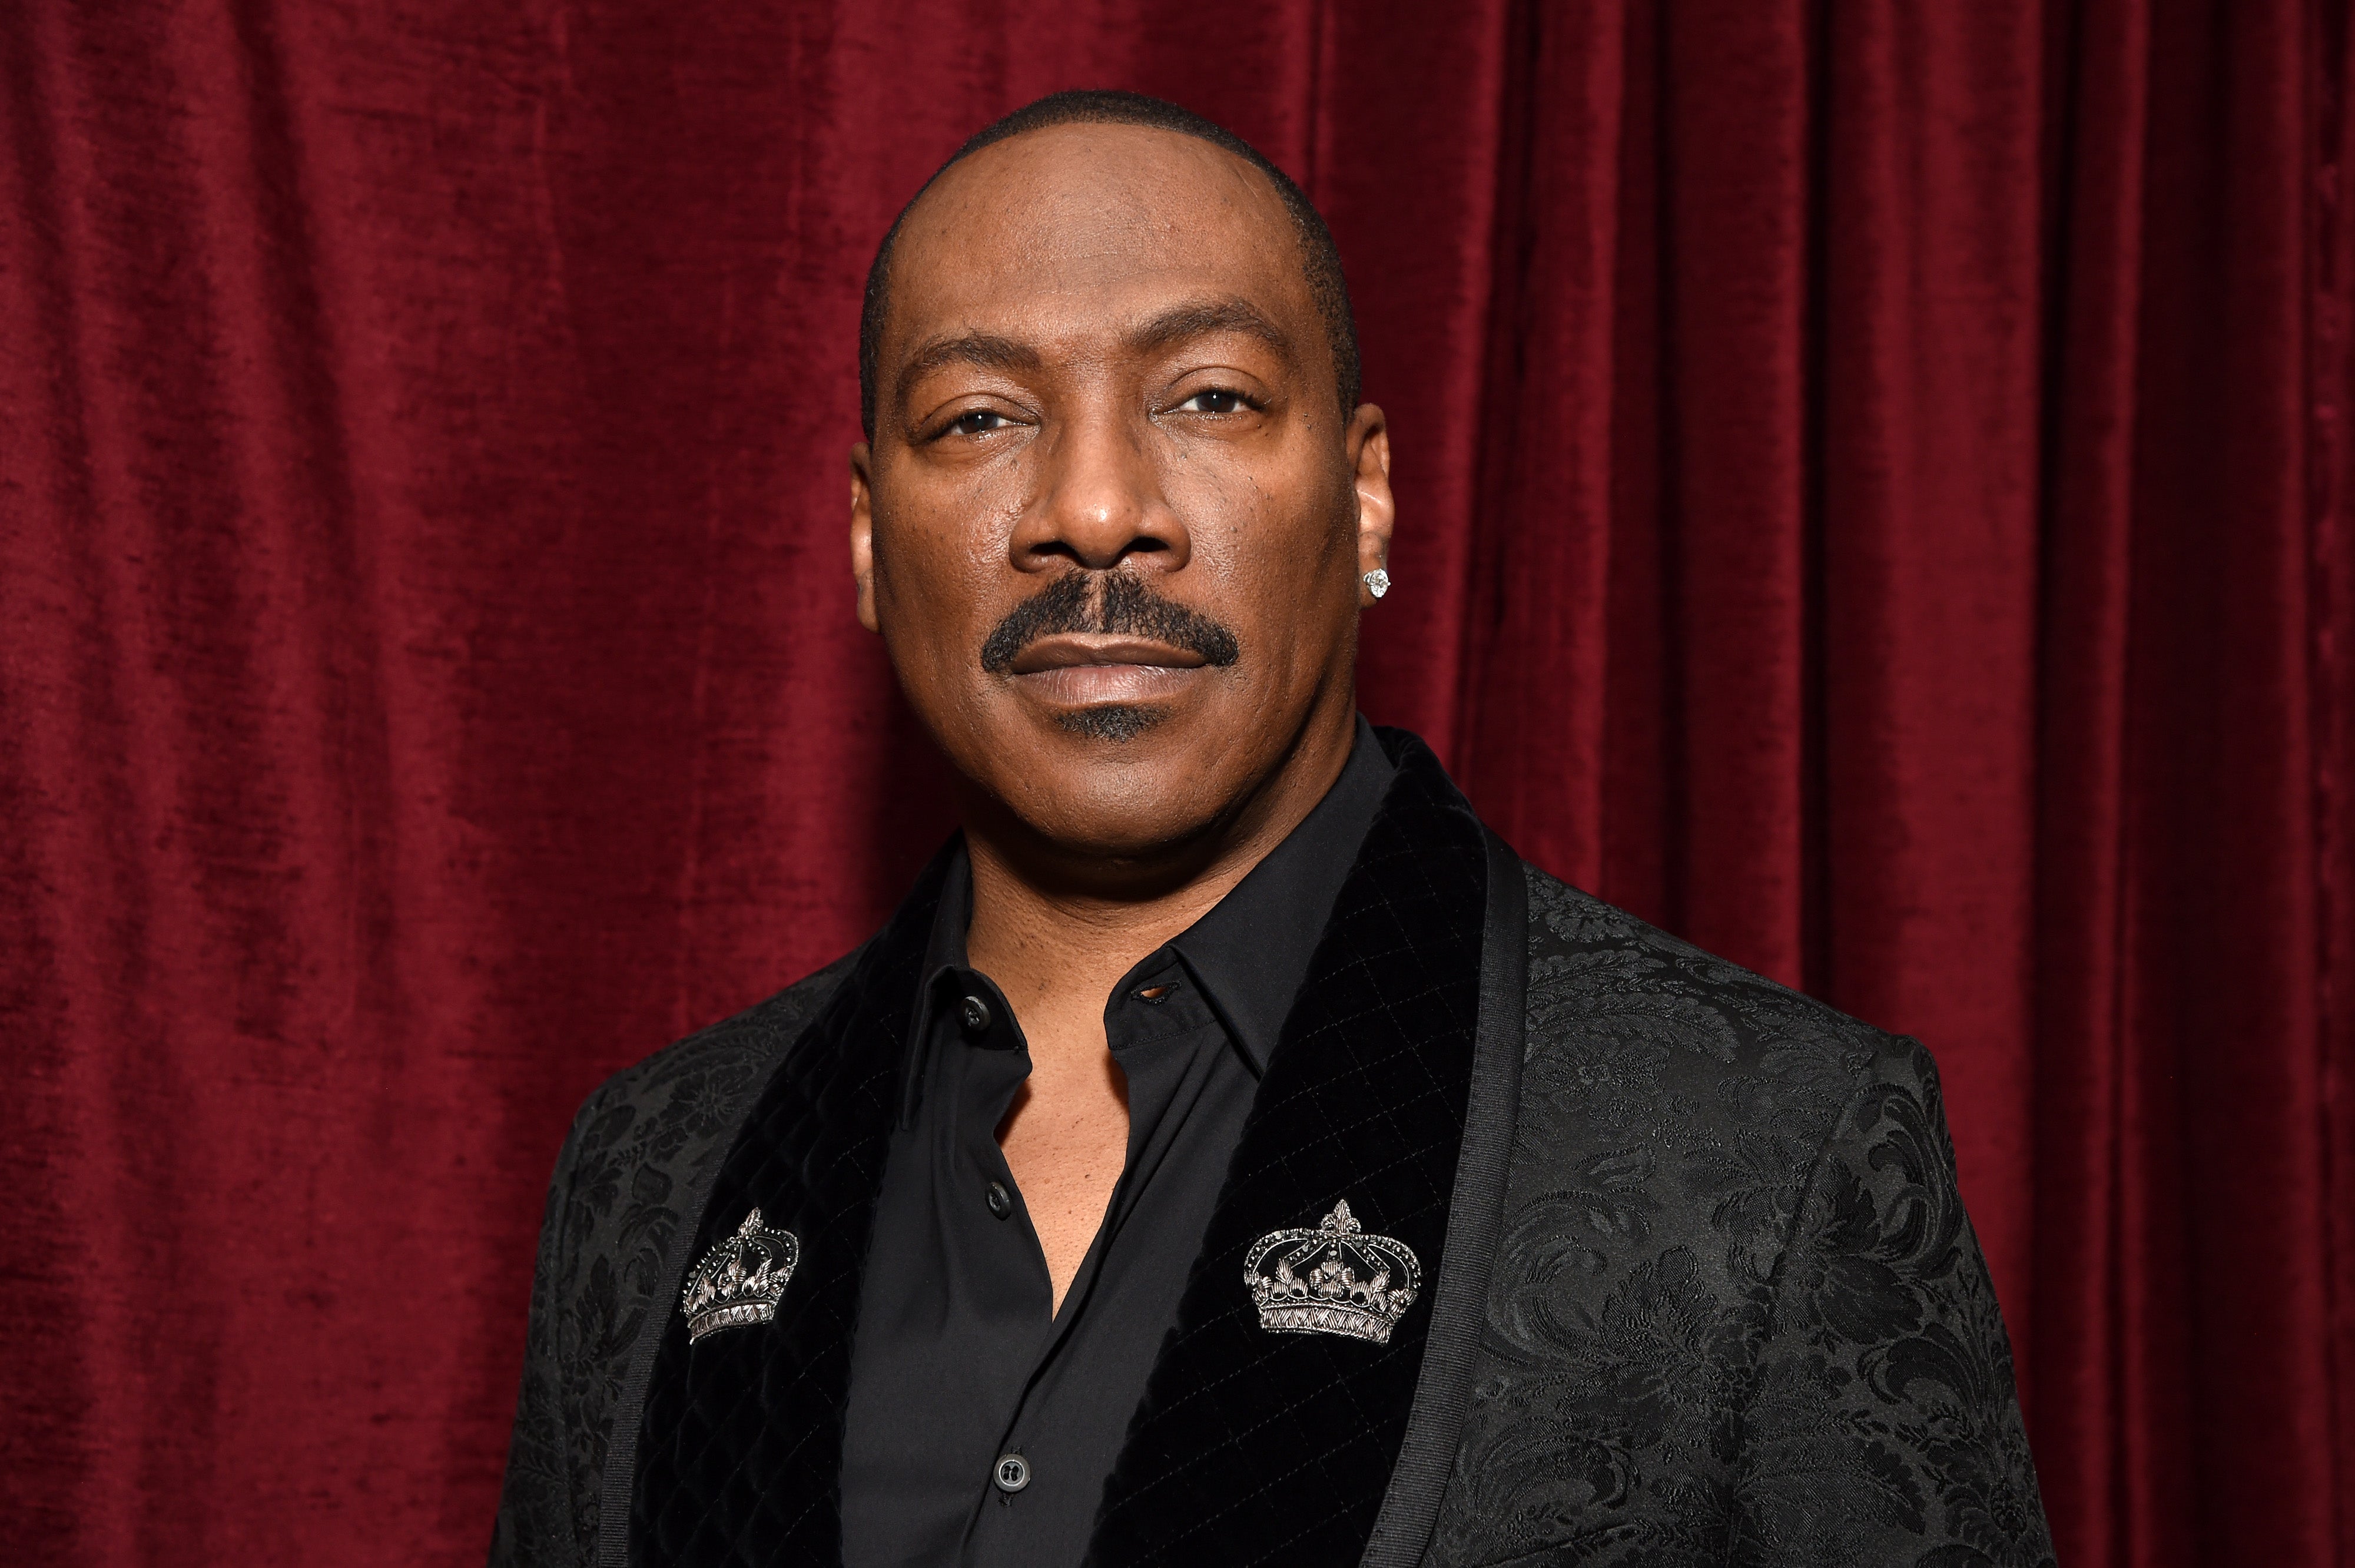 Eddie Murphy Wins His First Emmy Award For 'Saturday Night Live': 'It's Been 40 Years'